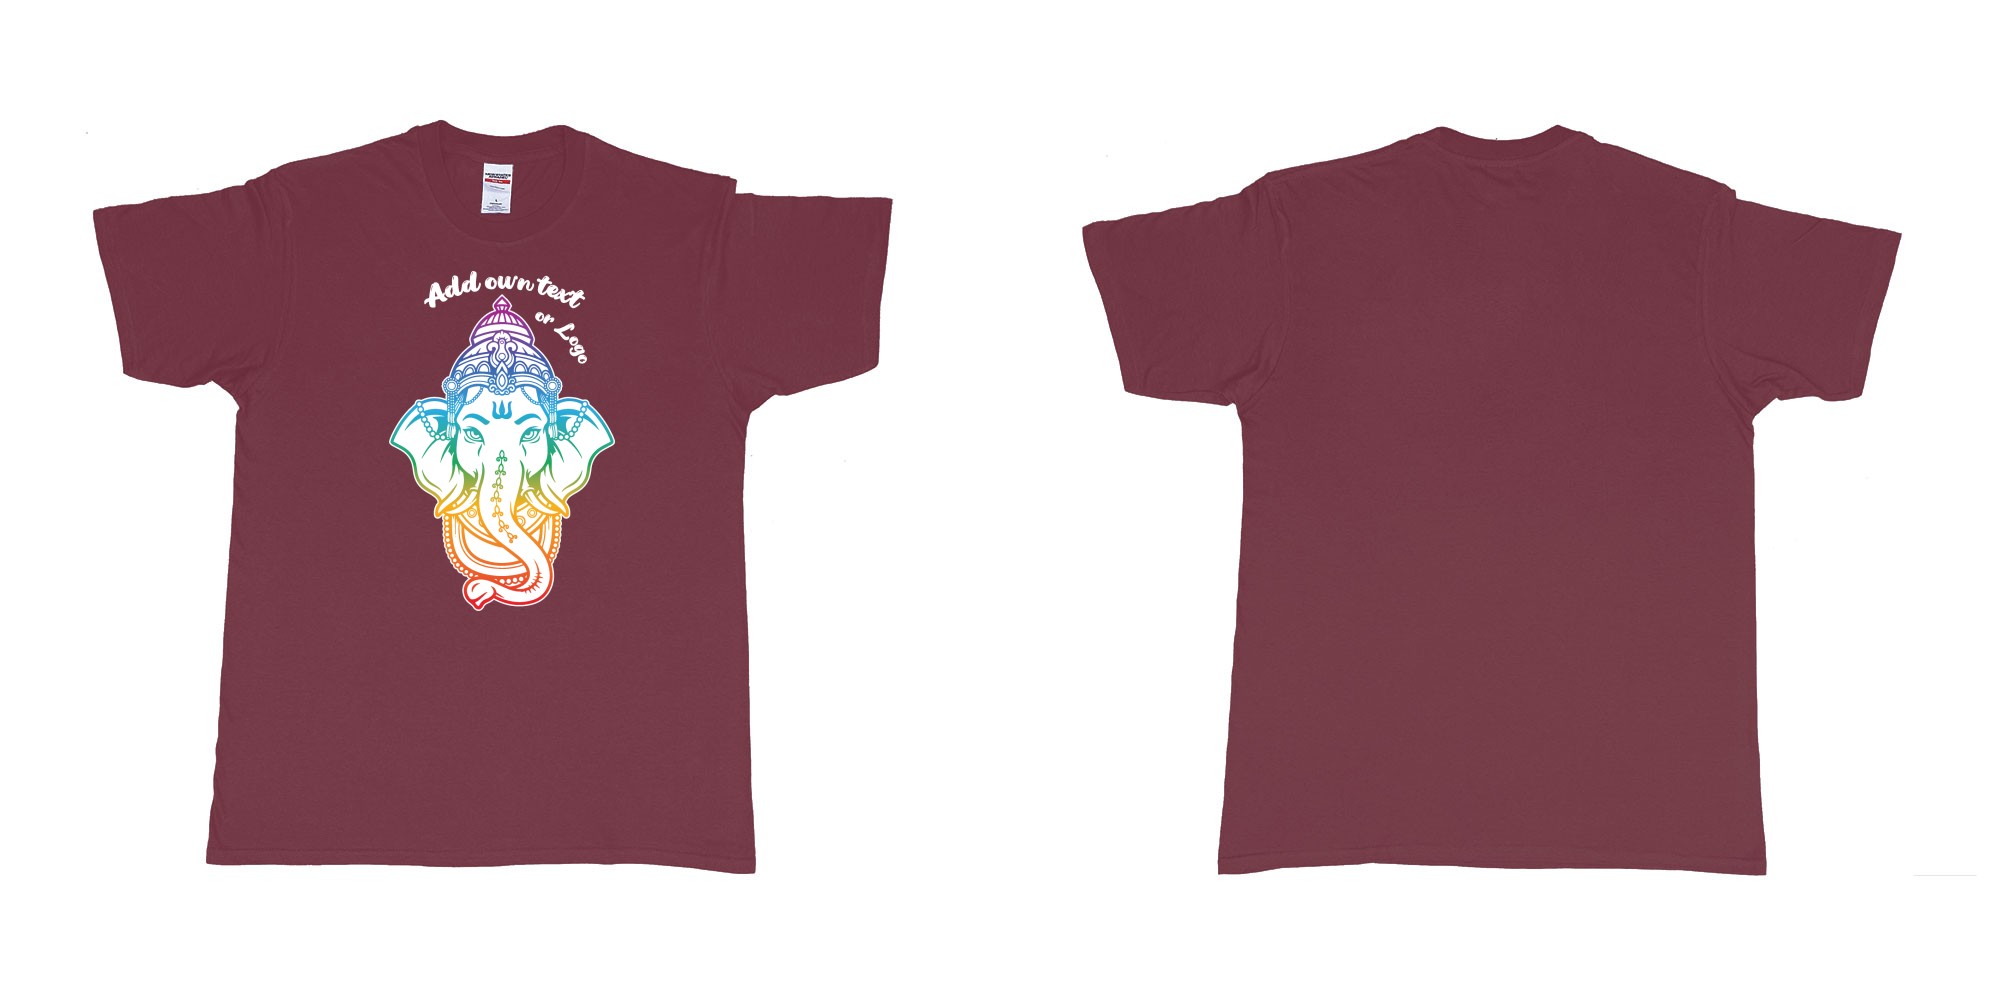 Custom tshirt design ganesha rainbow custom printing in fabric color marron choice your own text made in Bali by The Pirate Way